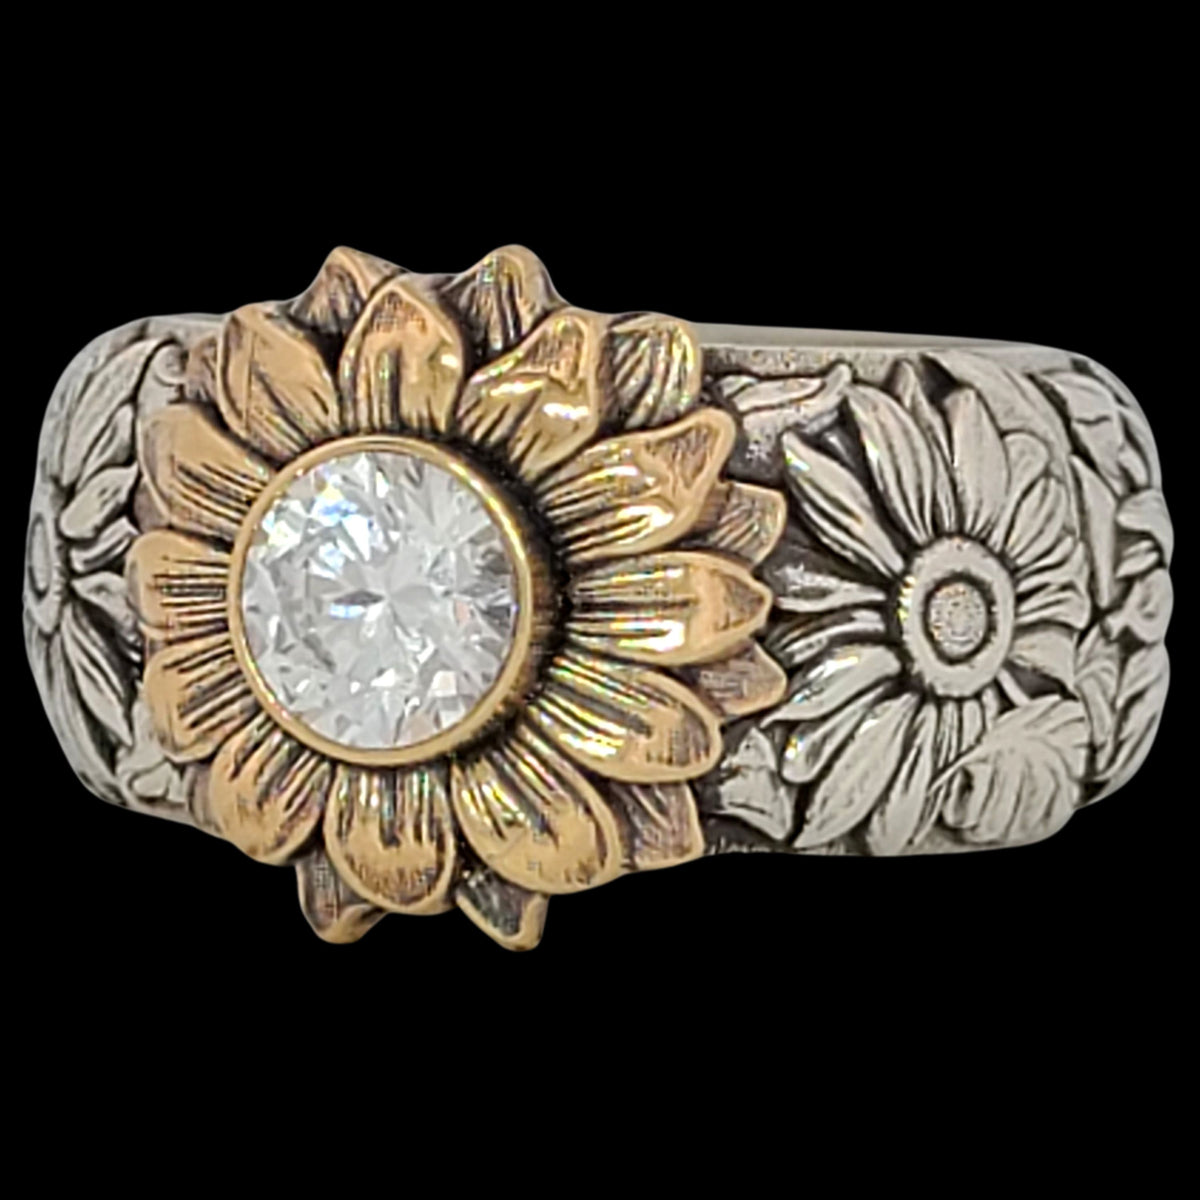 SUNFLOWER SOLITAIRE Ring in SILVER with CHOICE of 5mm GEMSTONE - Starting at $299